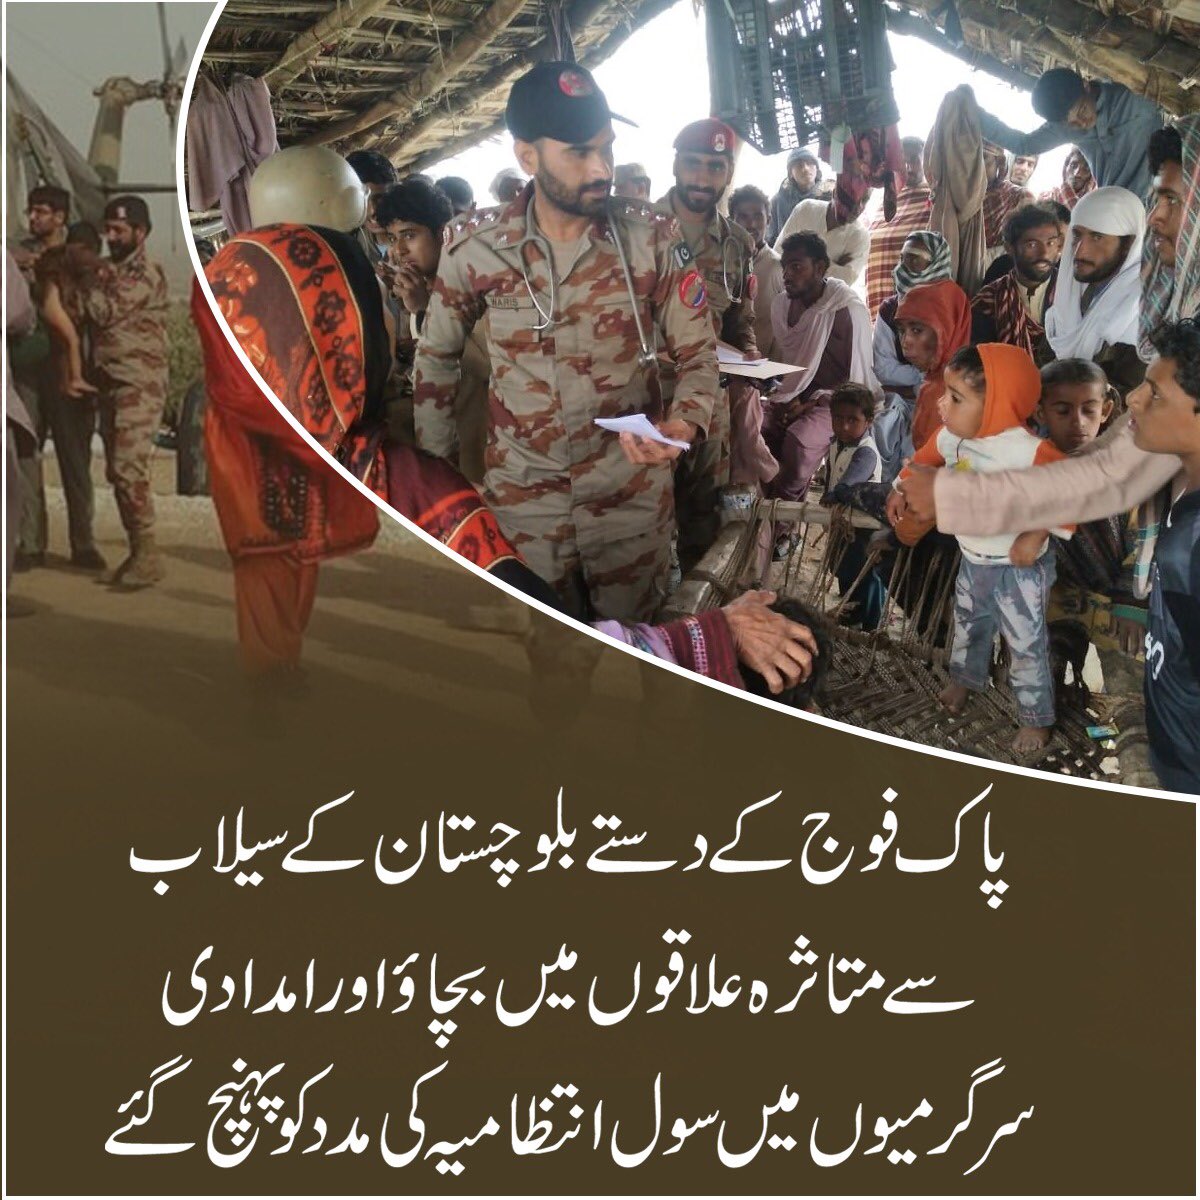 #BackToStability Pakistan Army has started relief work in Balochistan. People are being rescued and medical aid is being given.